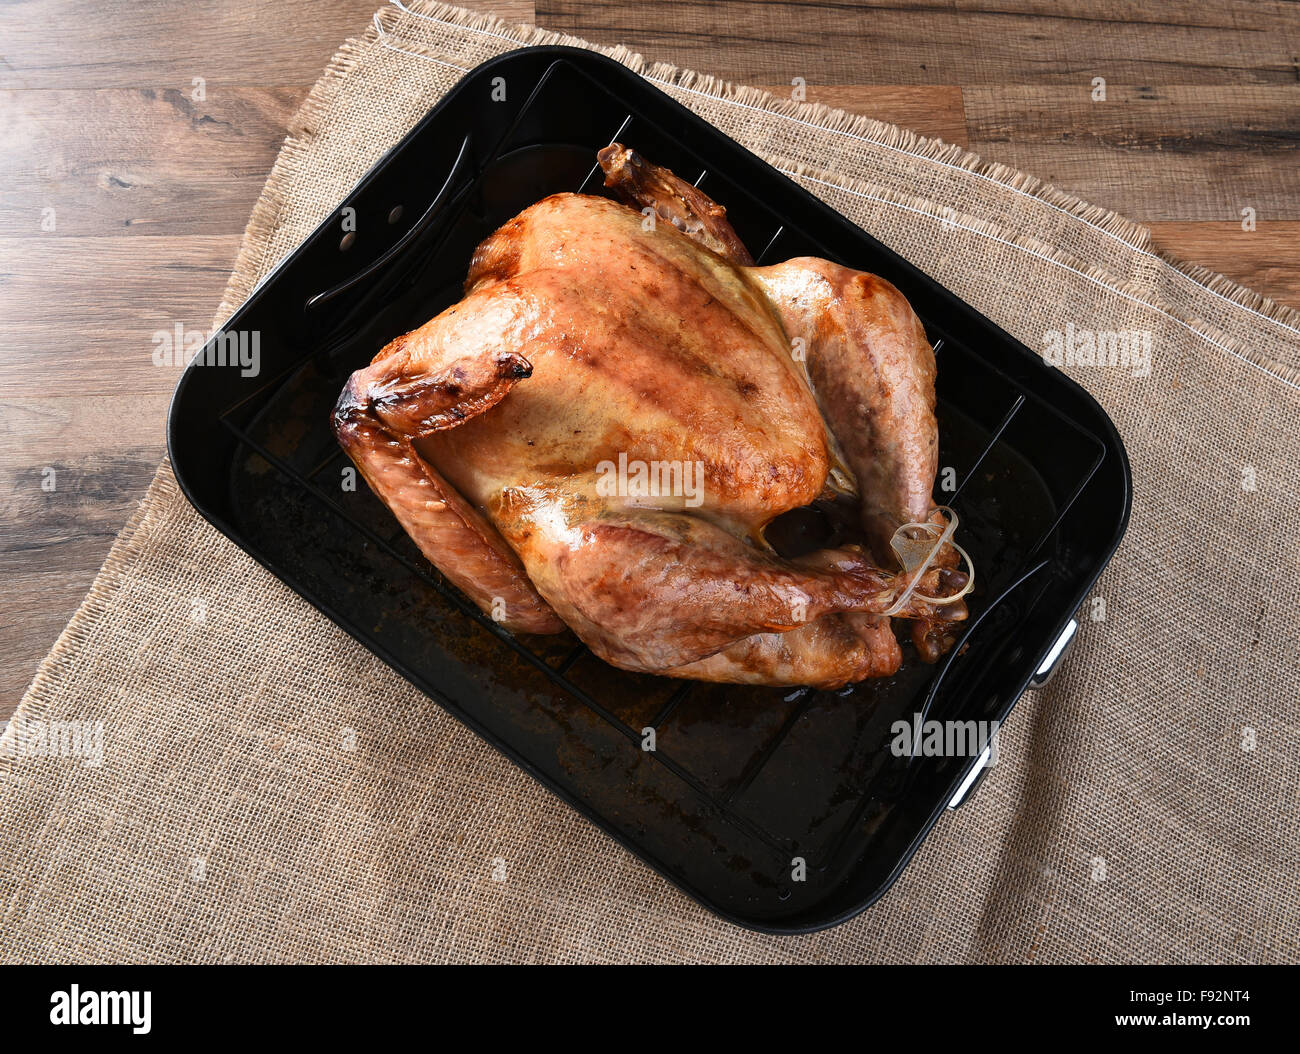 https://c8.alamy.com/comp/F92NT4/high-angle-view-of-a-cooked-turkey-in-a-roasting-pan-the-golden-brown-F92NT4.jpg